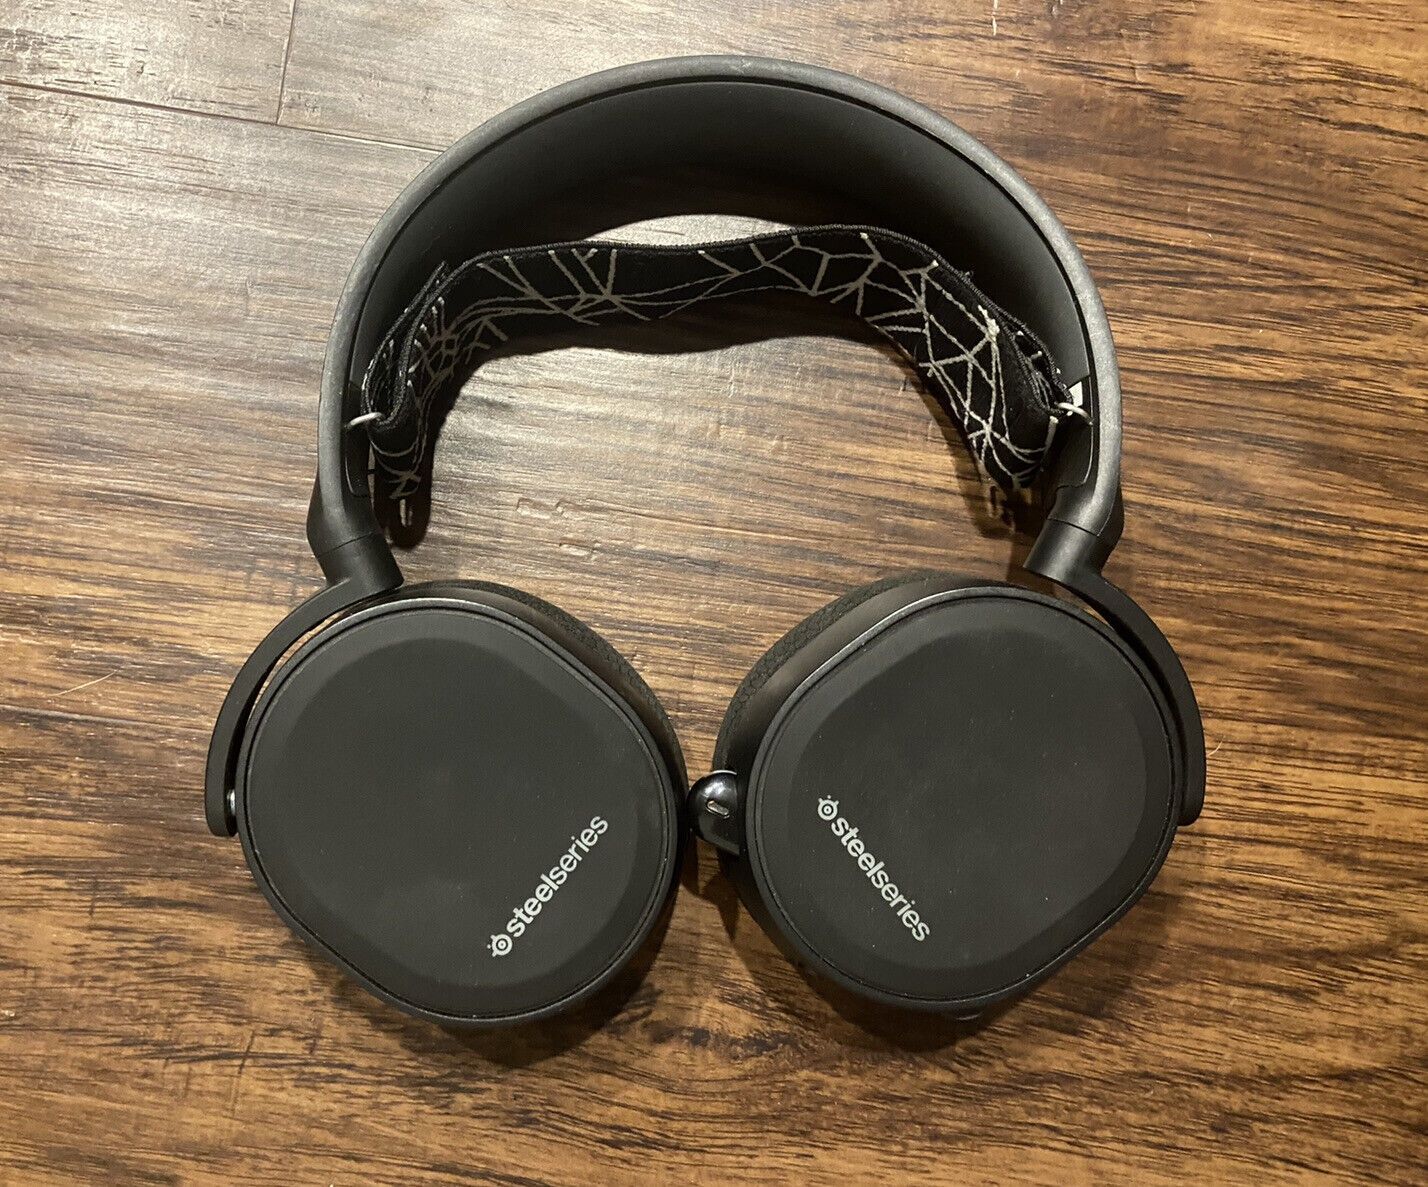 Steelseries ARCTIS 5 2019 7.1 Surround Sound Gaming Headset with RGB